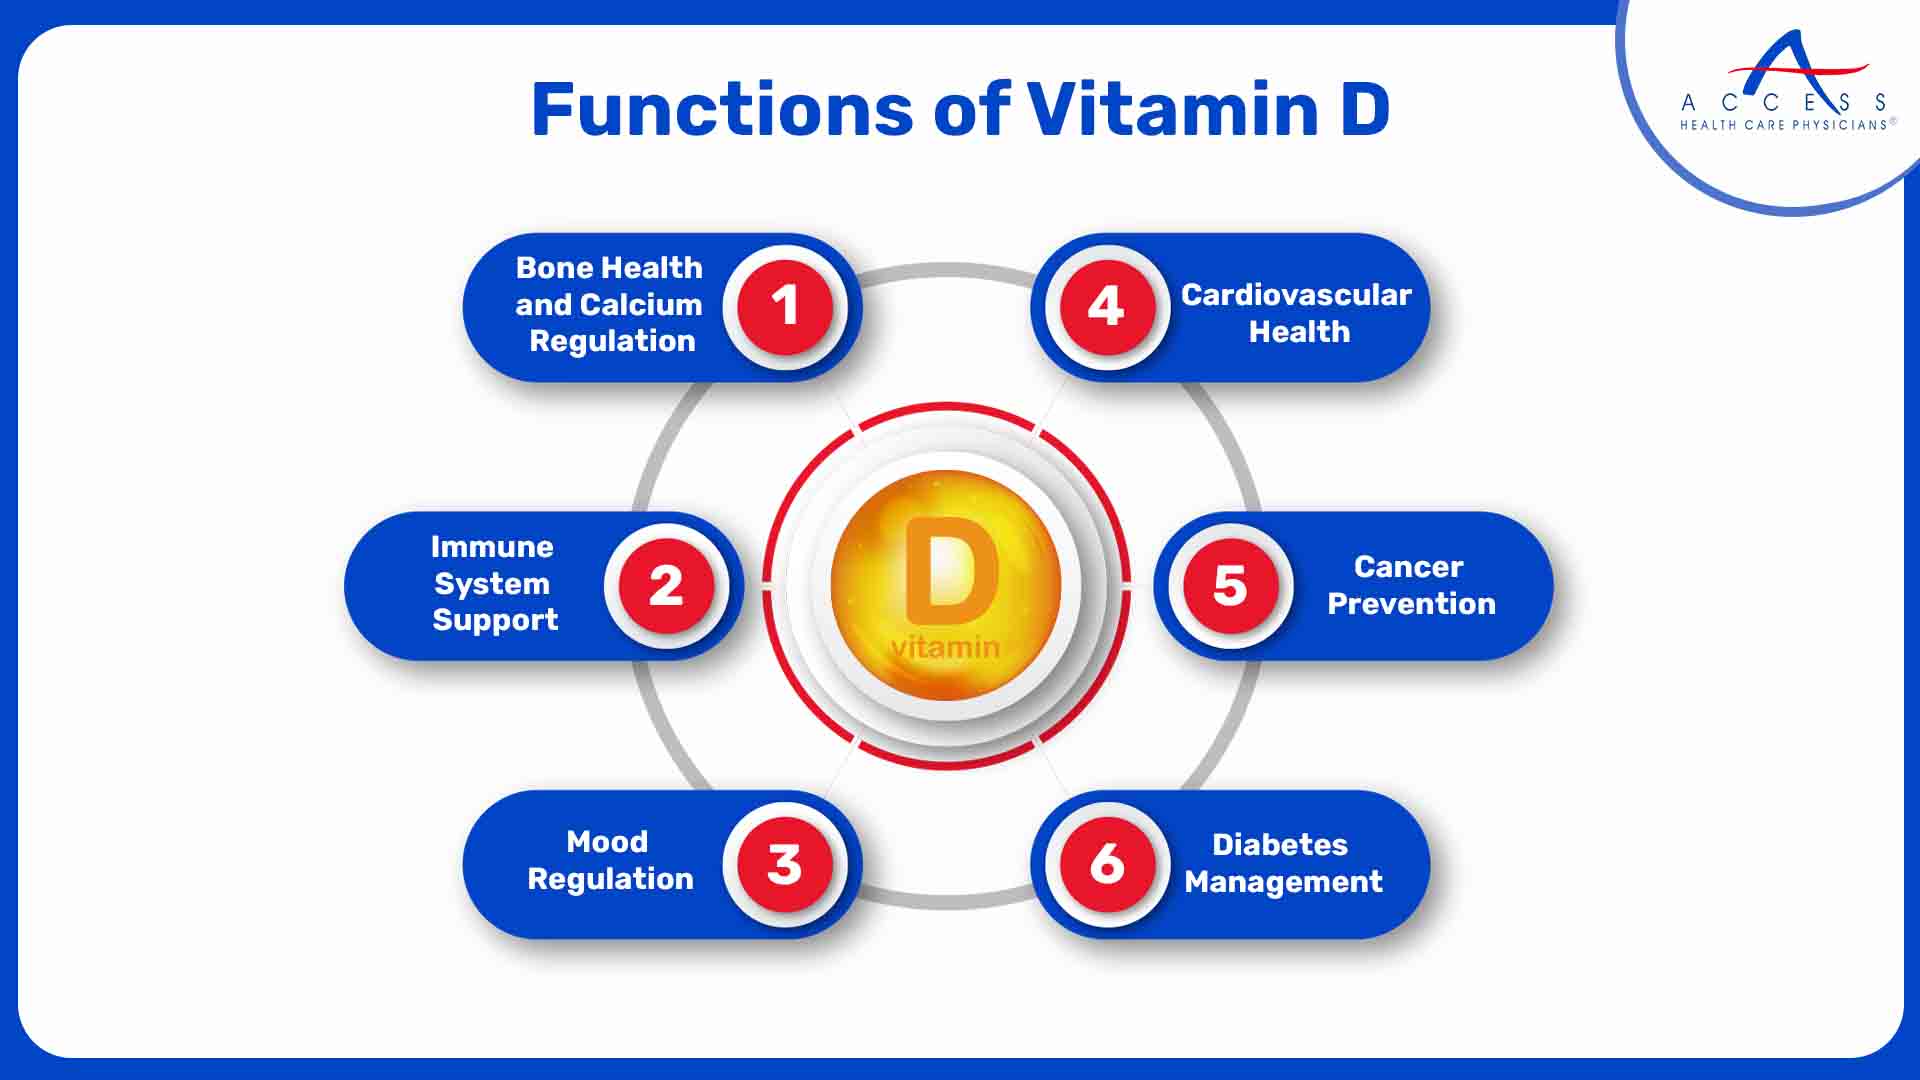 Functions of Vitamin D